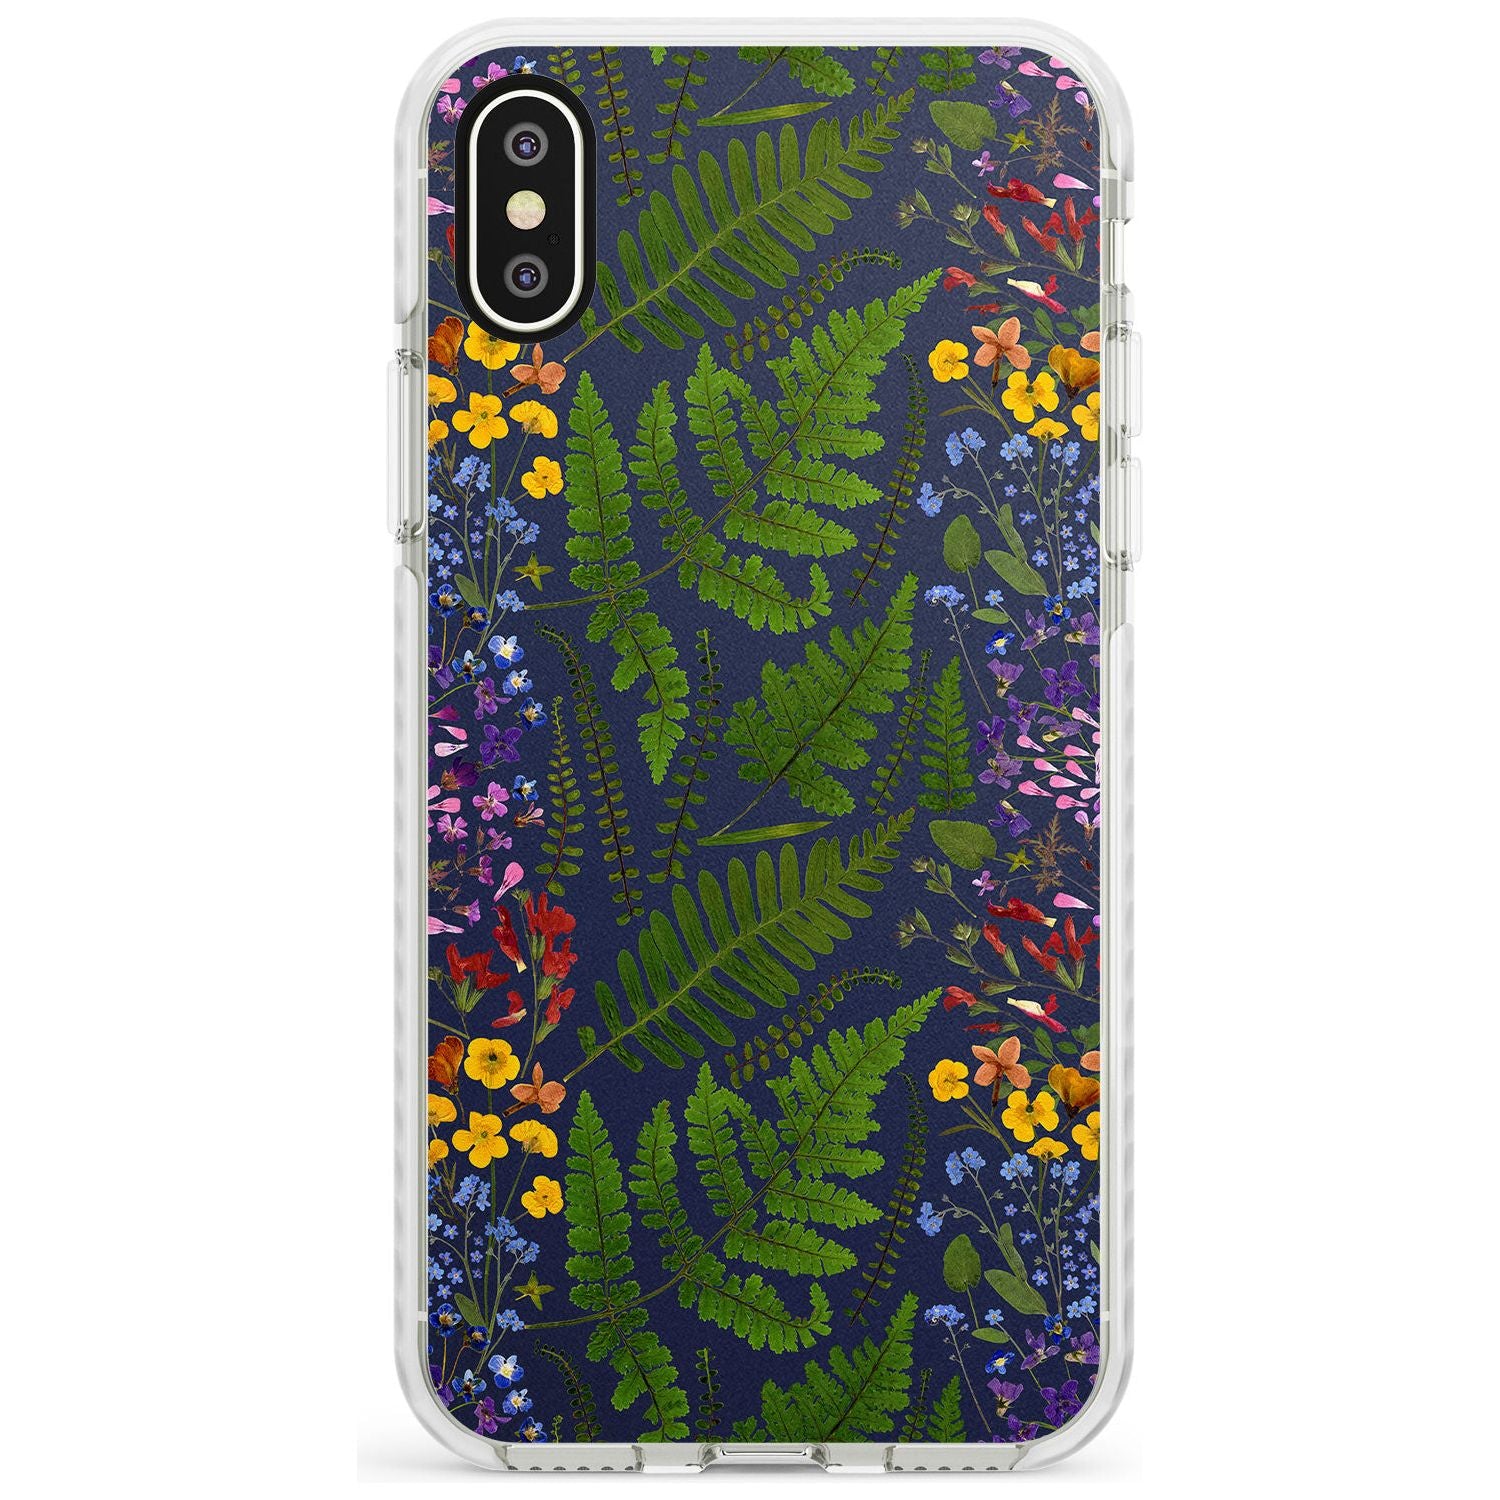 Busy Floral and Fern Design - Navy Impact Phone Case for iPhone X XS Max XR